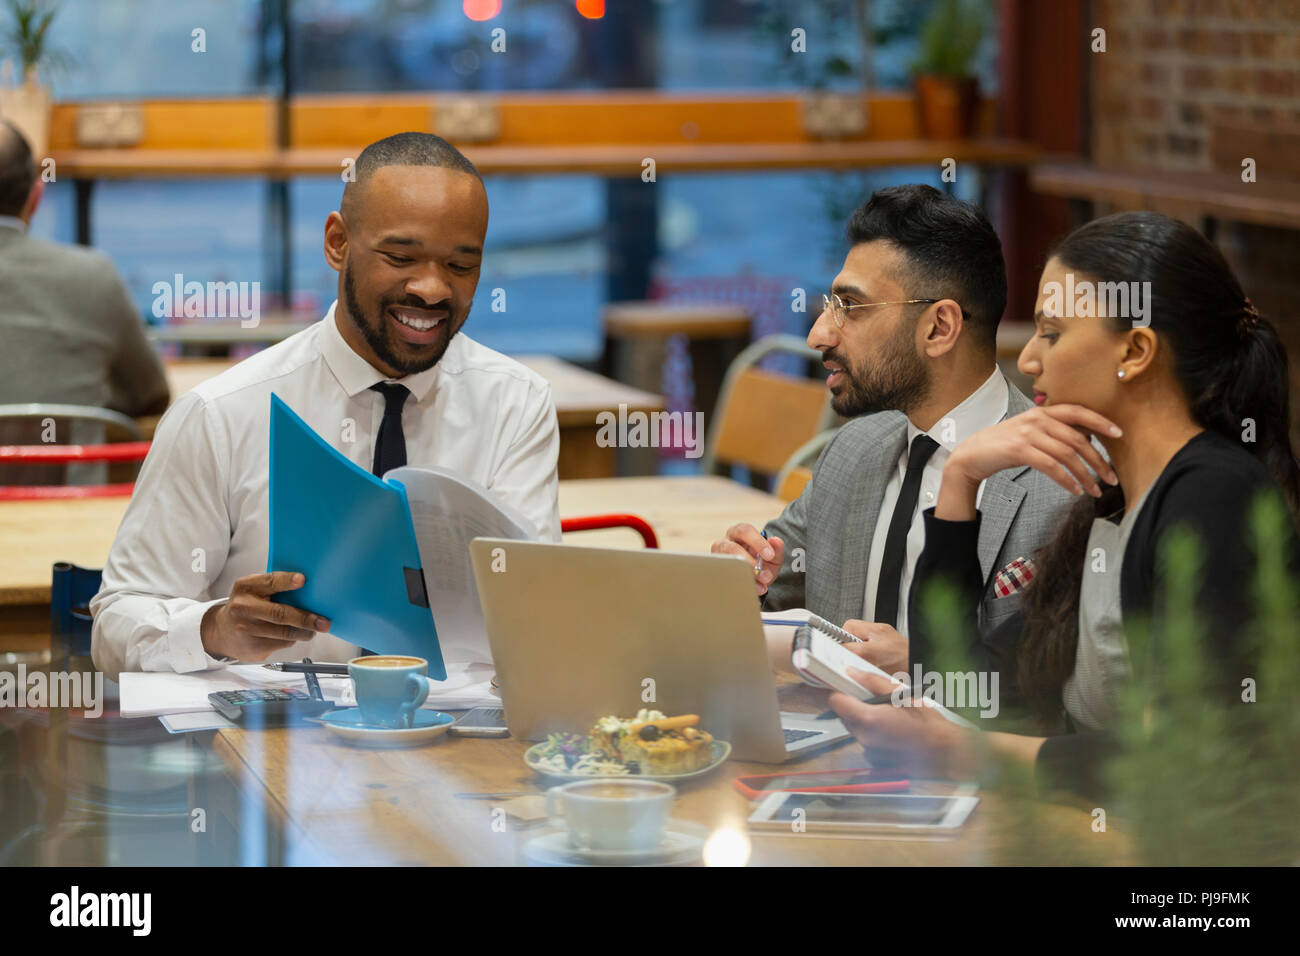 Business people discussing paperwork, working in cafe Stock Photo